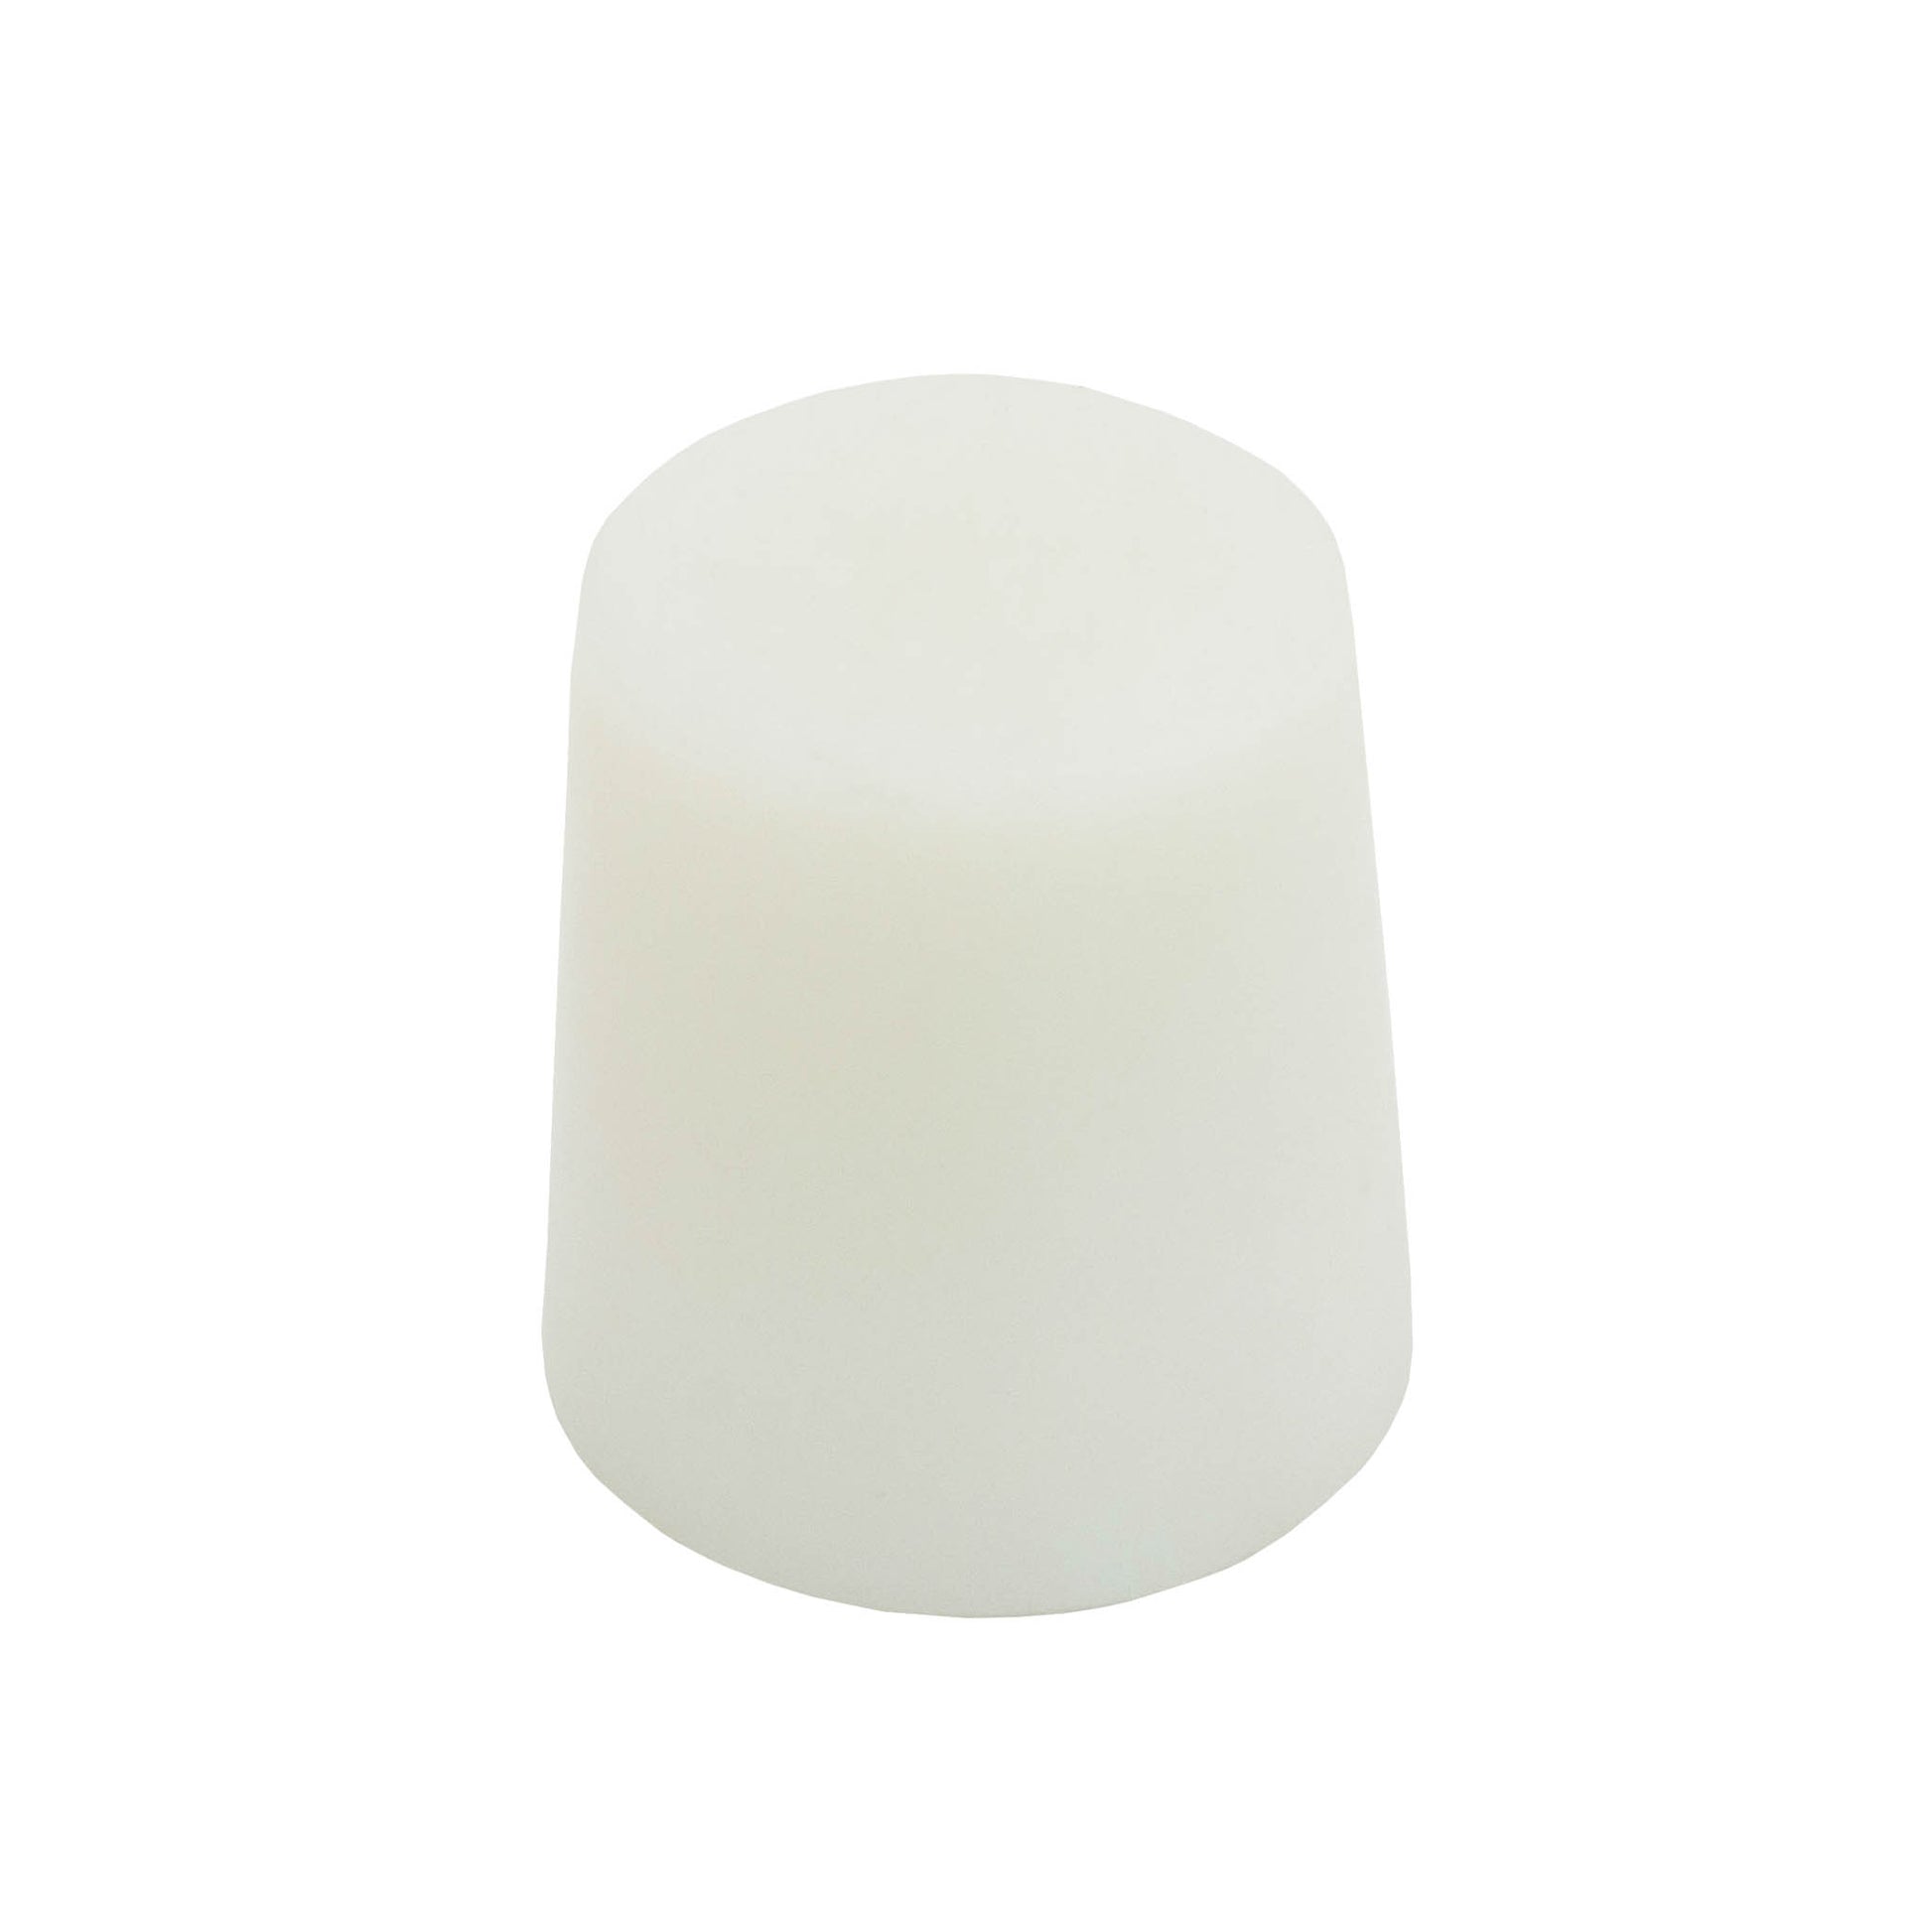 40mm solid silicone bung